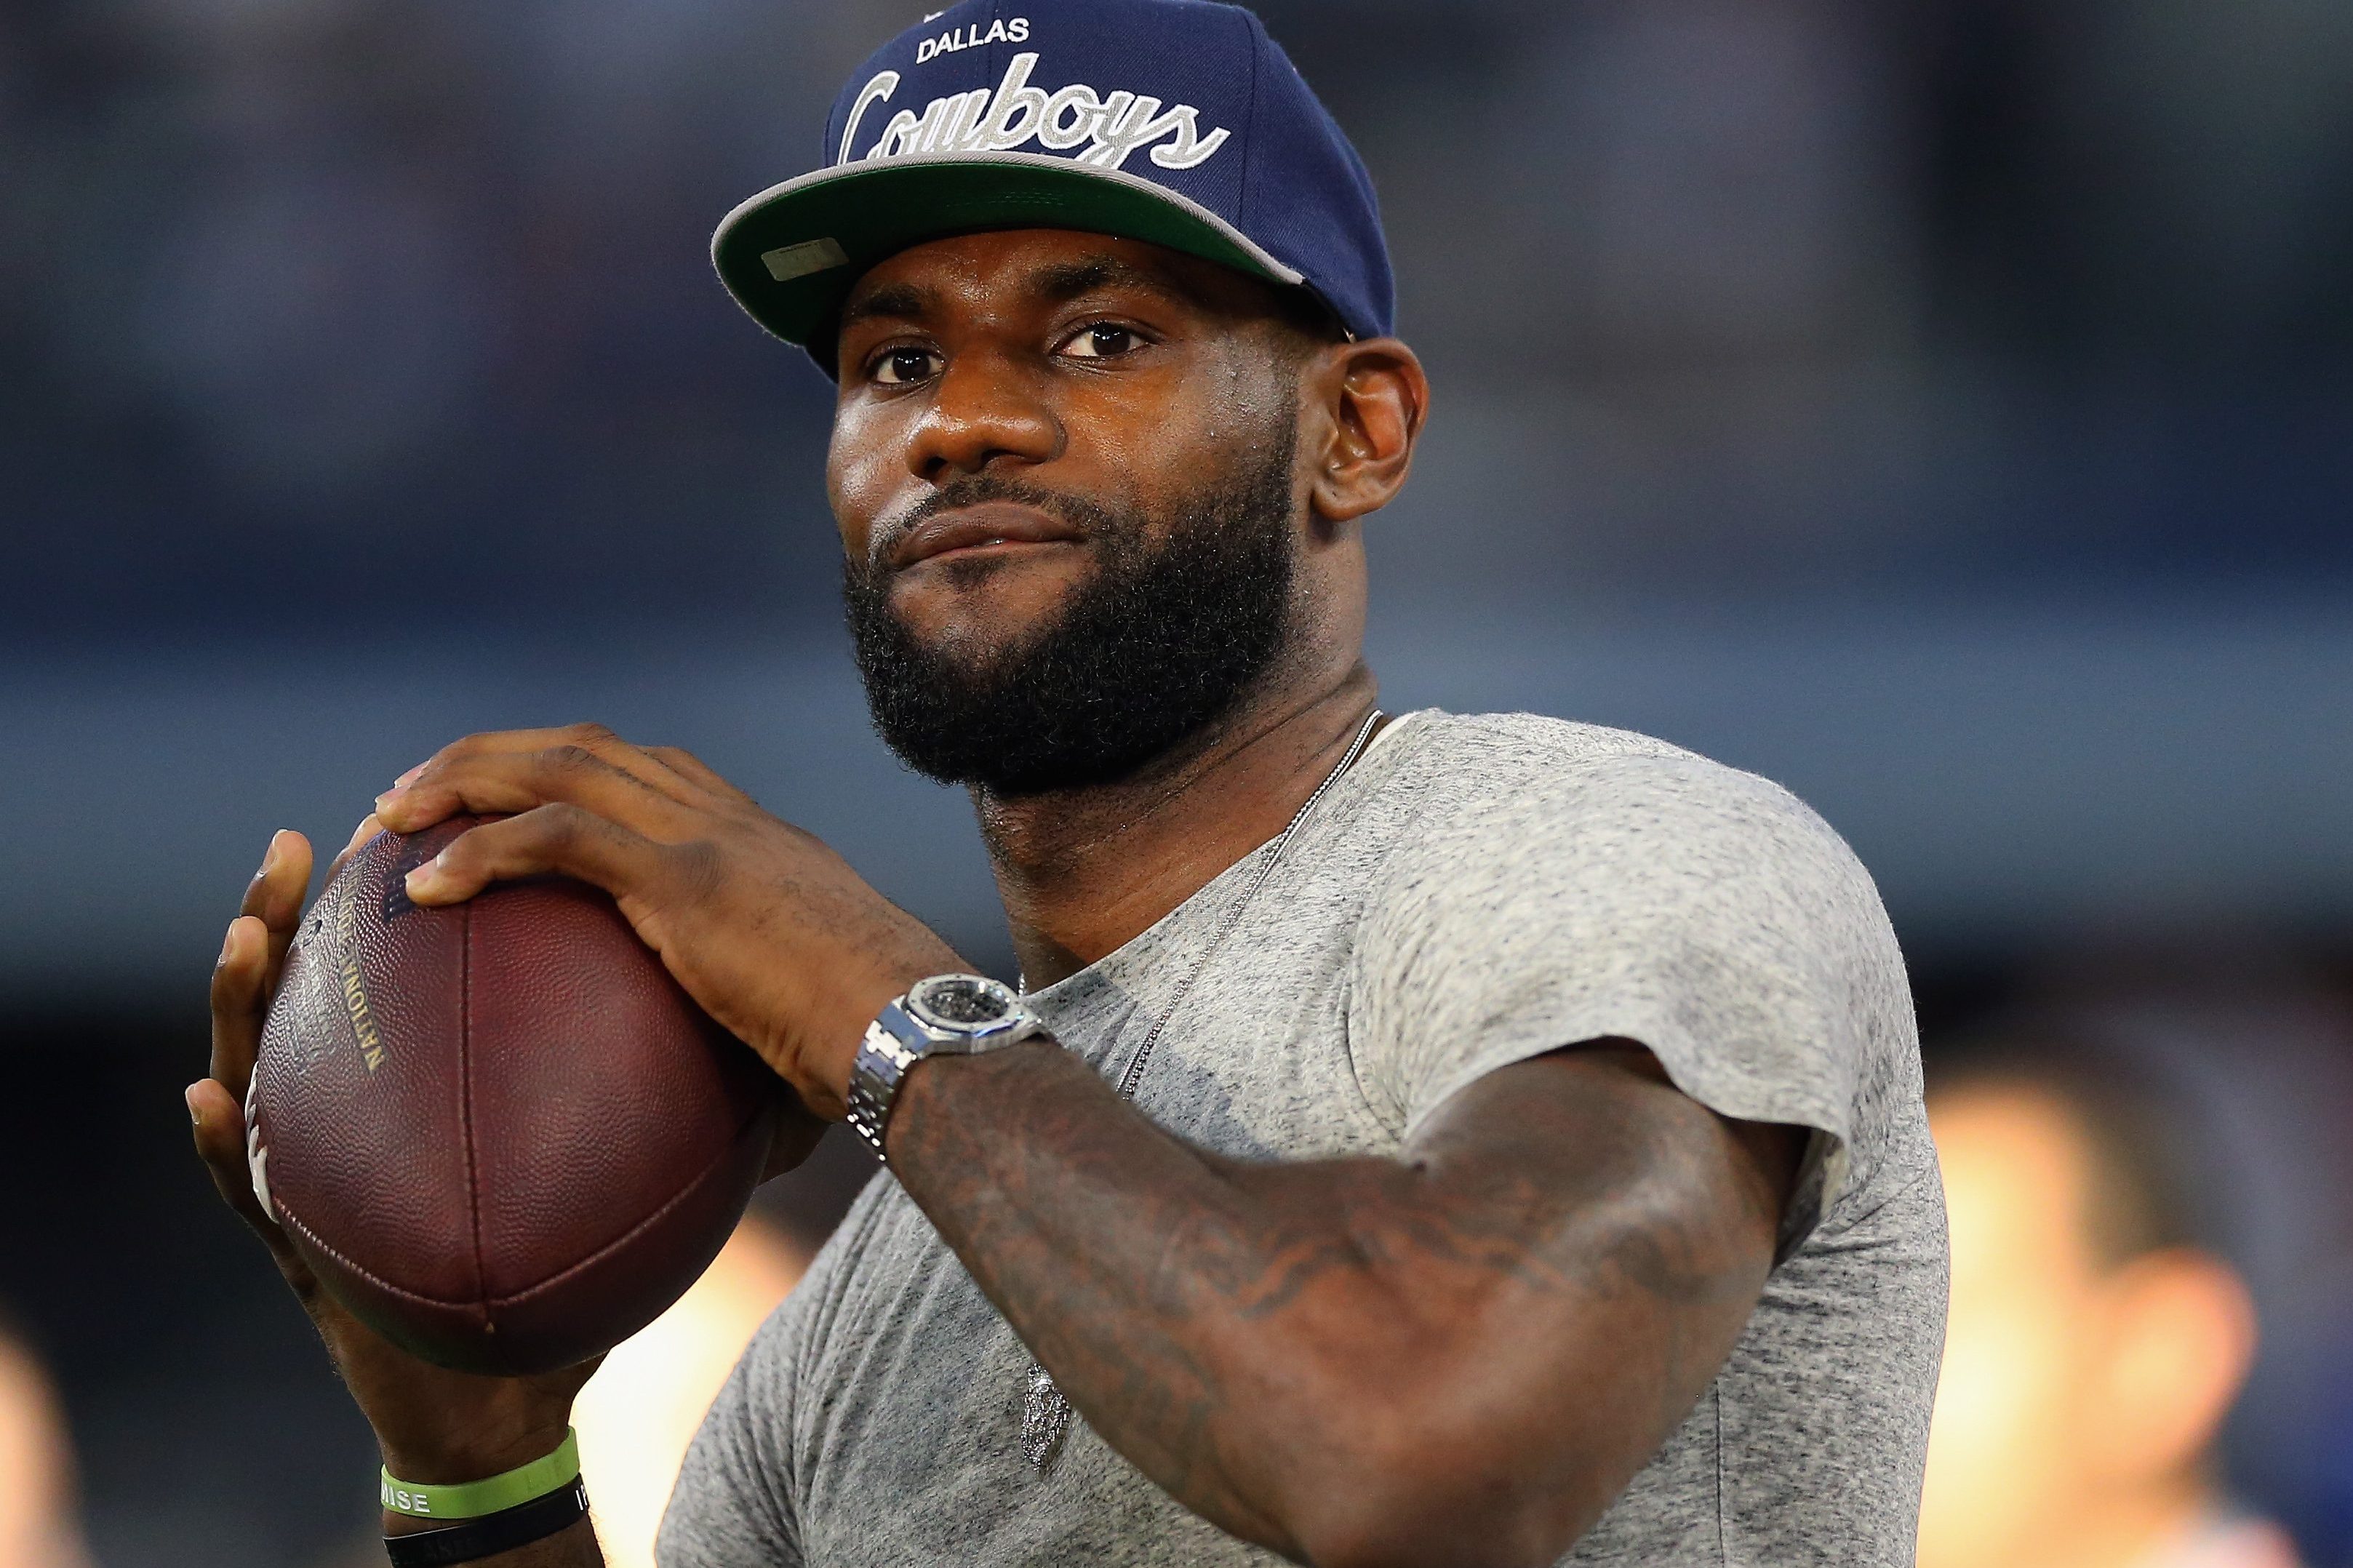 LeBron James Is Positive He Would Have Made an NFL Roster in 2011 if He Tried Out